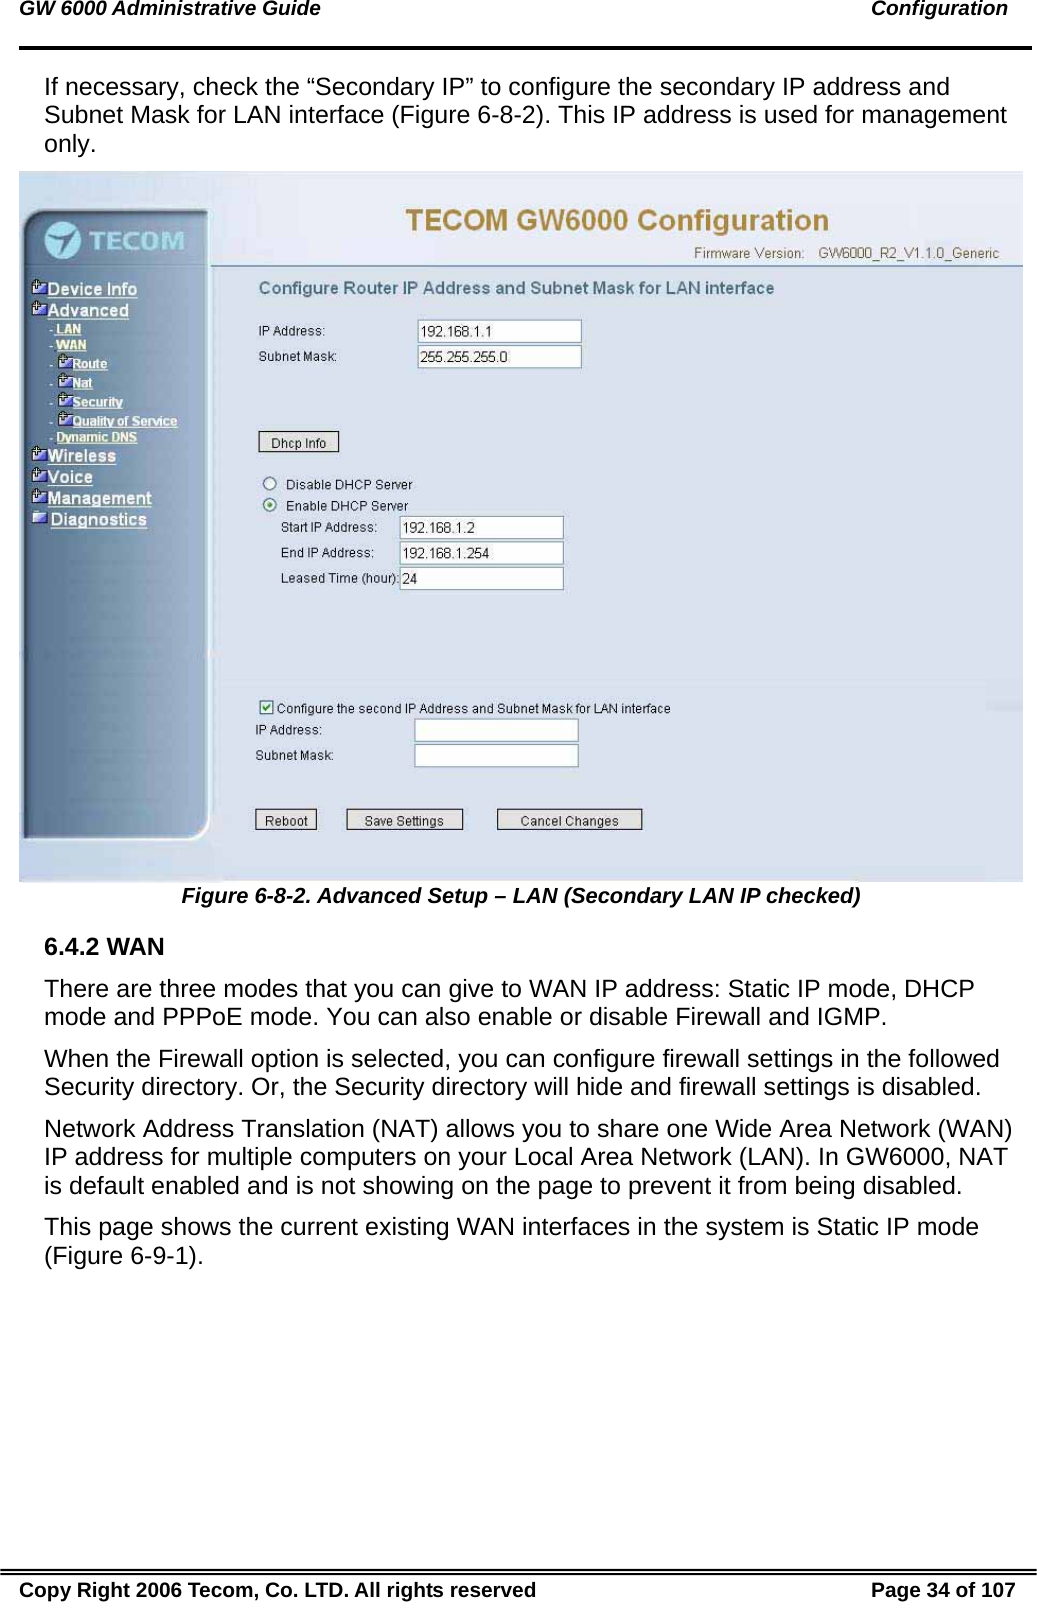 GW 6000 Administrative Guide                                                                                               Configuration If necessary, check the “Secondary IP” to configure the secondary IP address and Subnet Mask for LAN interface (Figure 6-8-2). This IP address is used for management only.  Figure 6-8-2. Advanced Setup – LAN (Secondary LAN IP checked) 6.4.2 WAN There are three modes that you can give to WAN IP address: Static IP mode, DHCP mode and PPPoE mode. You can also enable or disable Firewall and IGMP. When the Firewall option is selected, you can configure firewall settings in the followed Security directory. Or, the Security directory will hide and firewall settings is disabled. Network Address Translation (NAT) allows you to share one Wide Area Network (WAN) IP address for multiple computers on your Local Area Network (LAN). In GW6000, NAT is default enabled and is not showing on the page to prevent it from being disabled. This page shows the current existing WAN interfaces in the system is Static IP mode (Figure 6-9-1). Copy Right 2006 Tecom, Co. LTD. All rights reserved  Page 34 of 107 